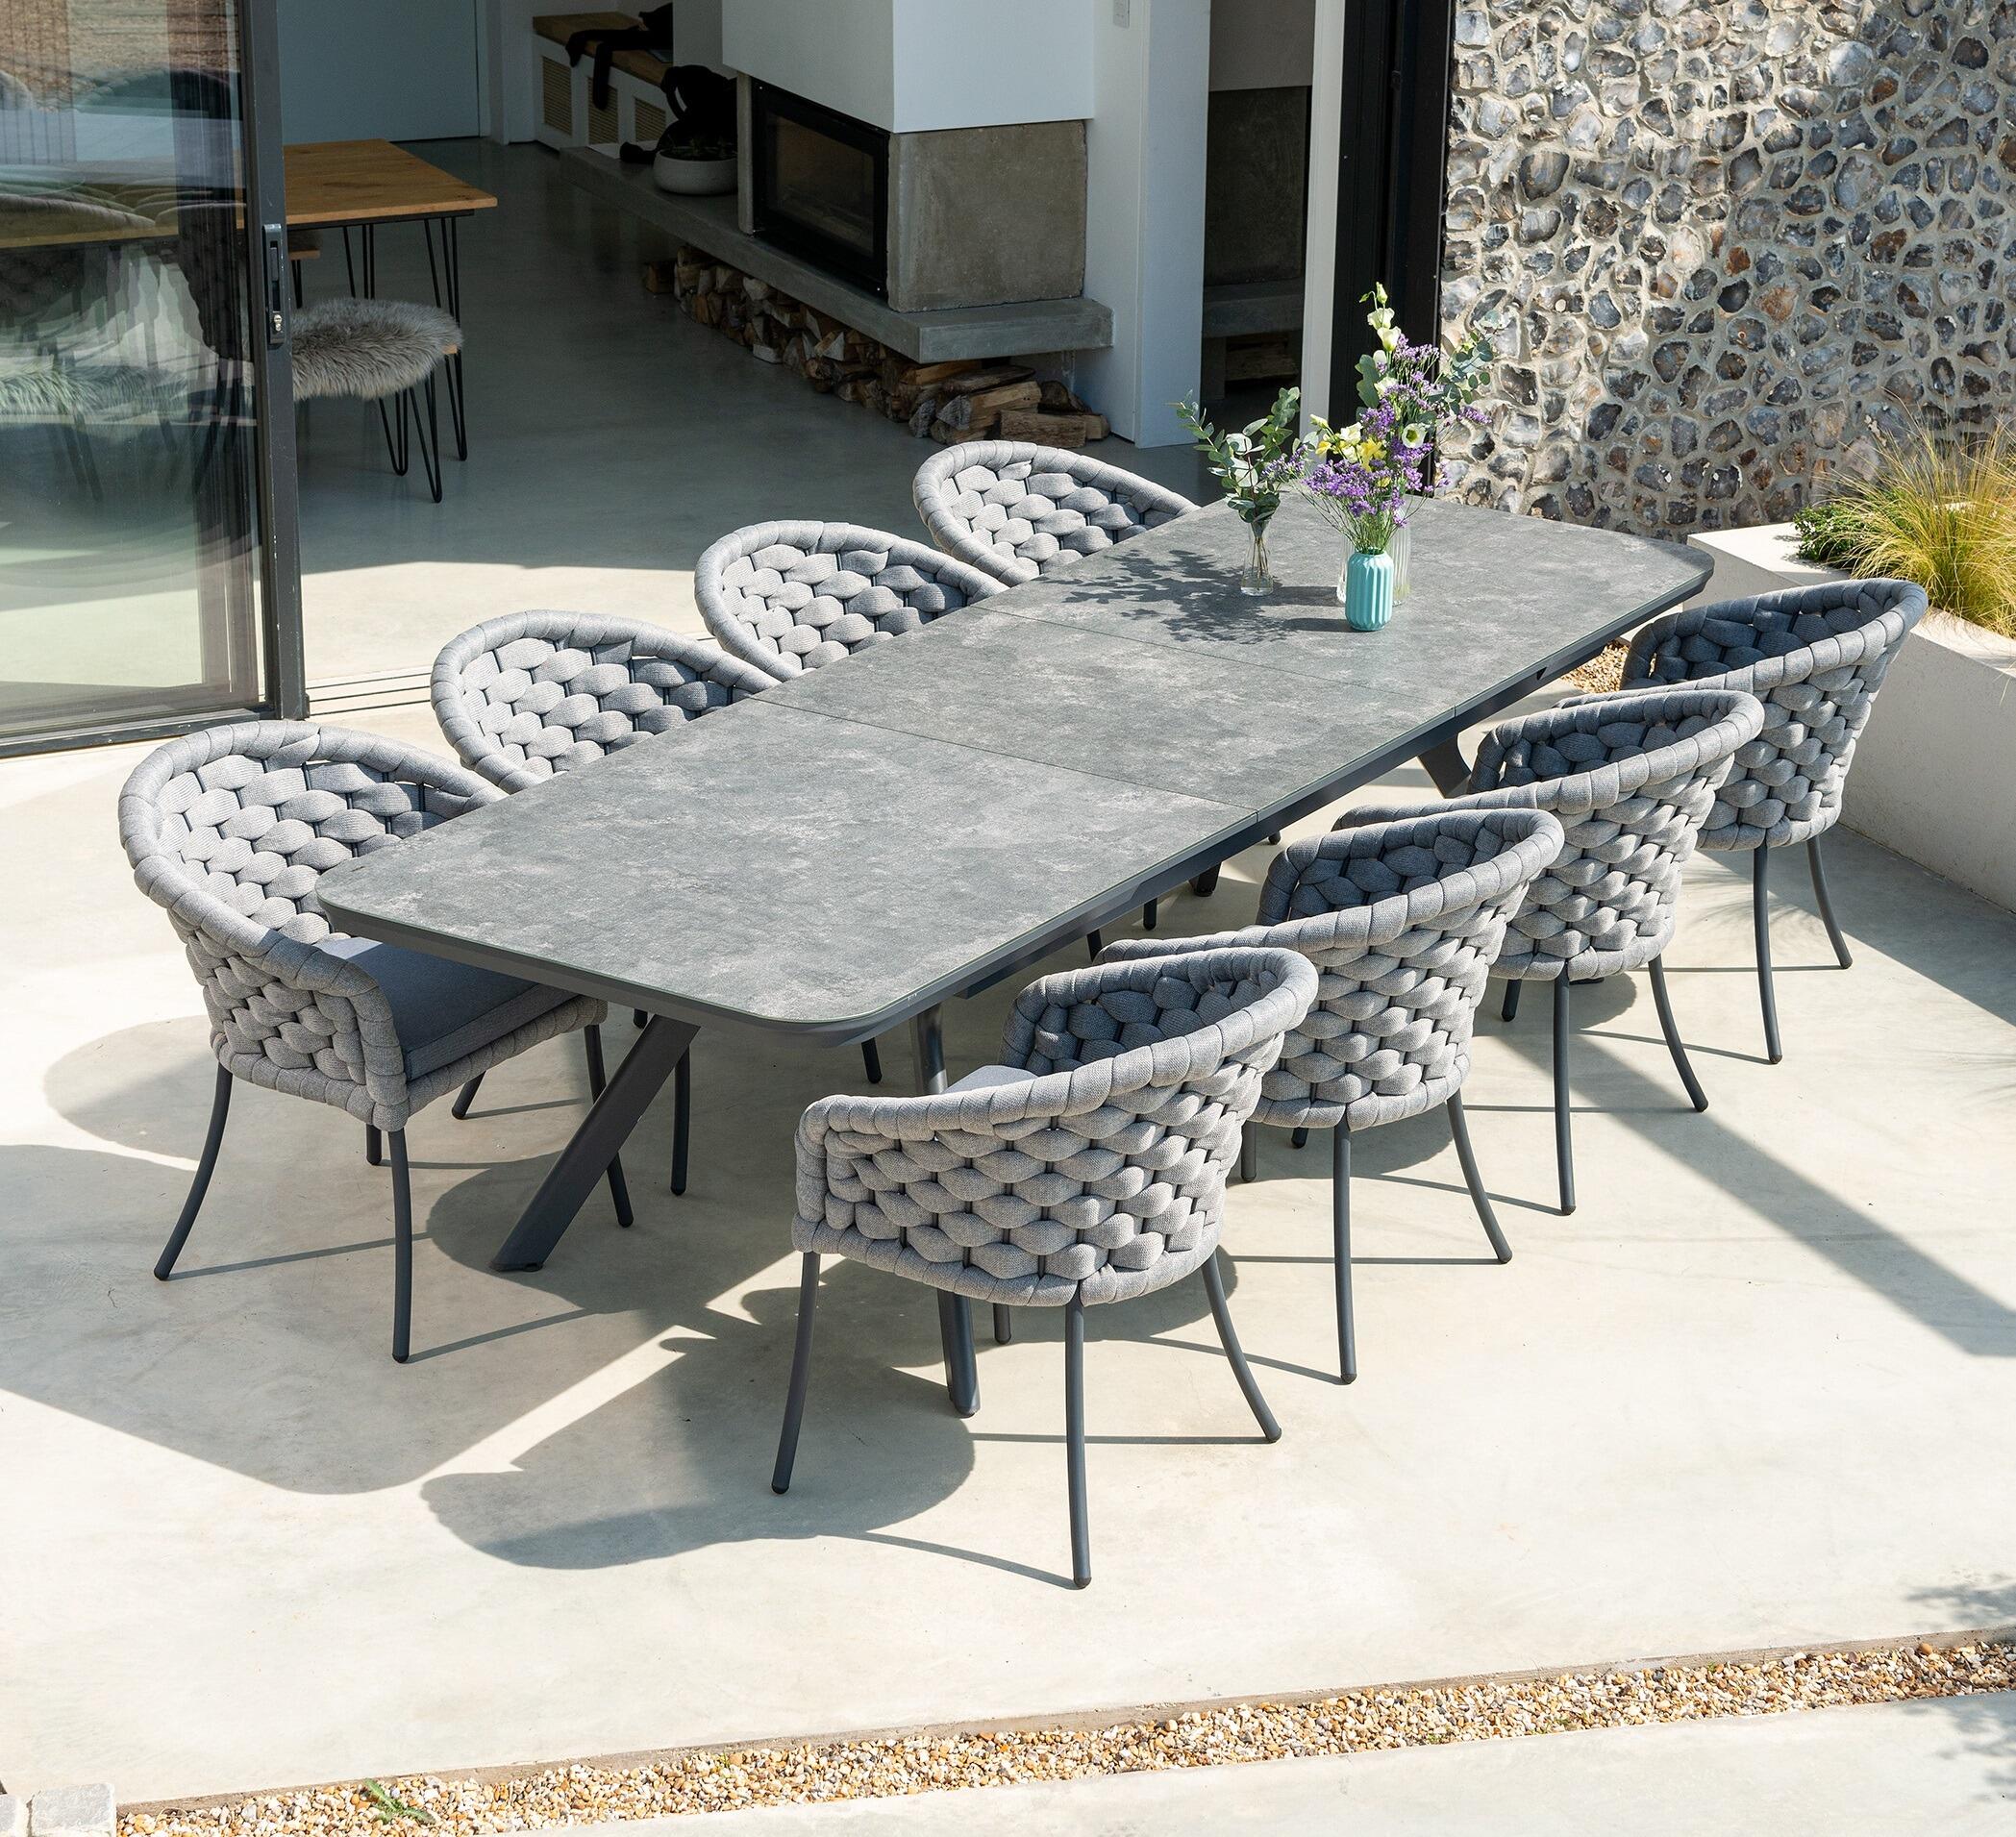 grey modern extending garden dining table 8 seater wide rope weave patio chairs light grey